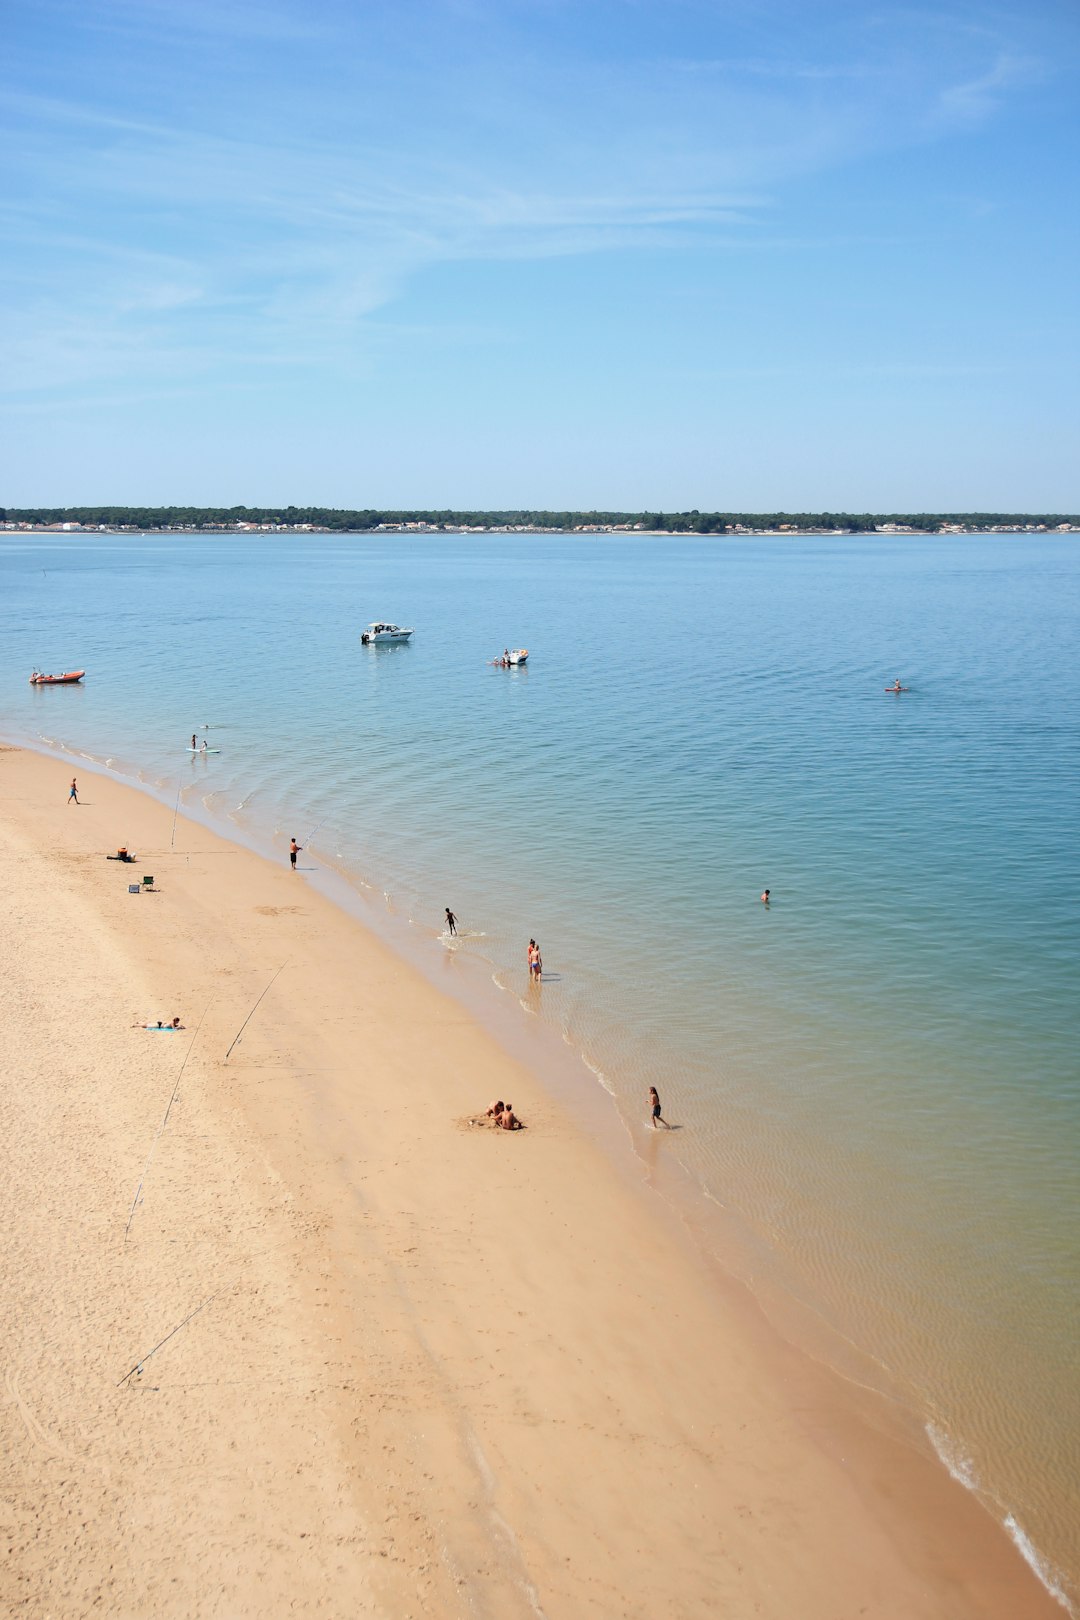 Travel Tips and Stories of Rivedoux-Plage in France